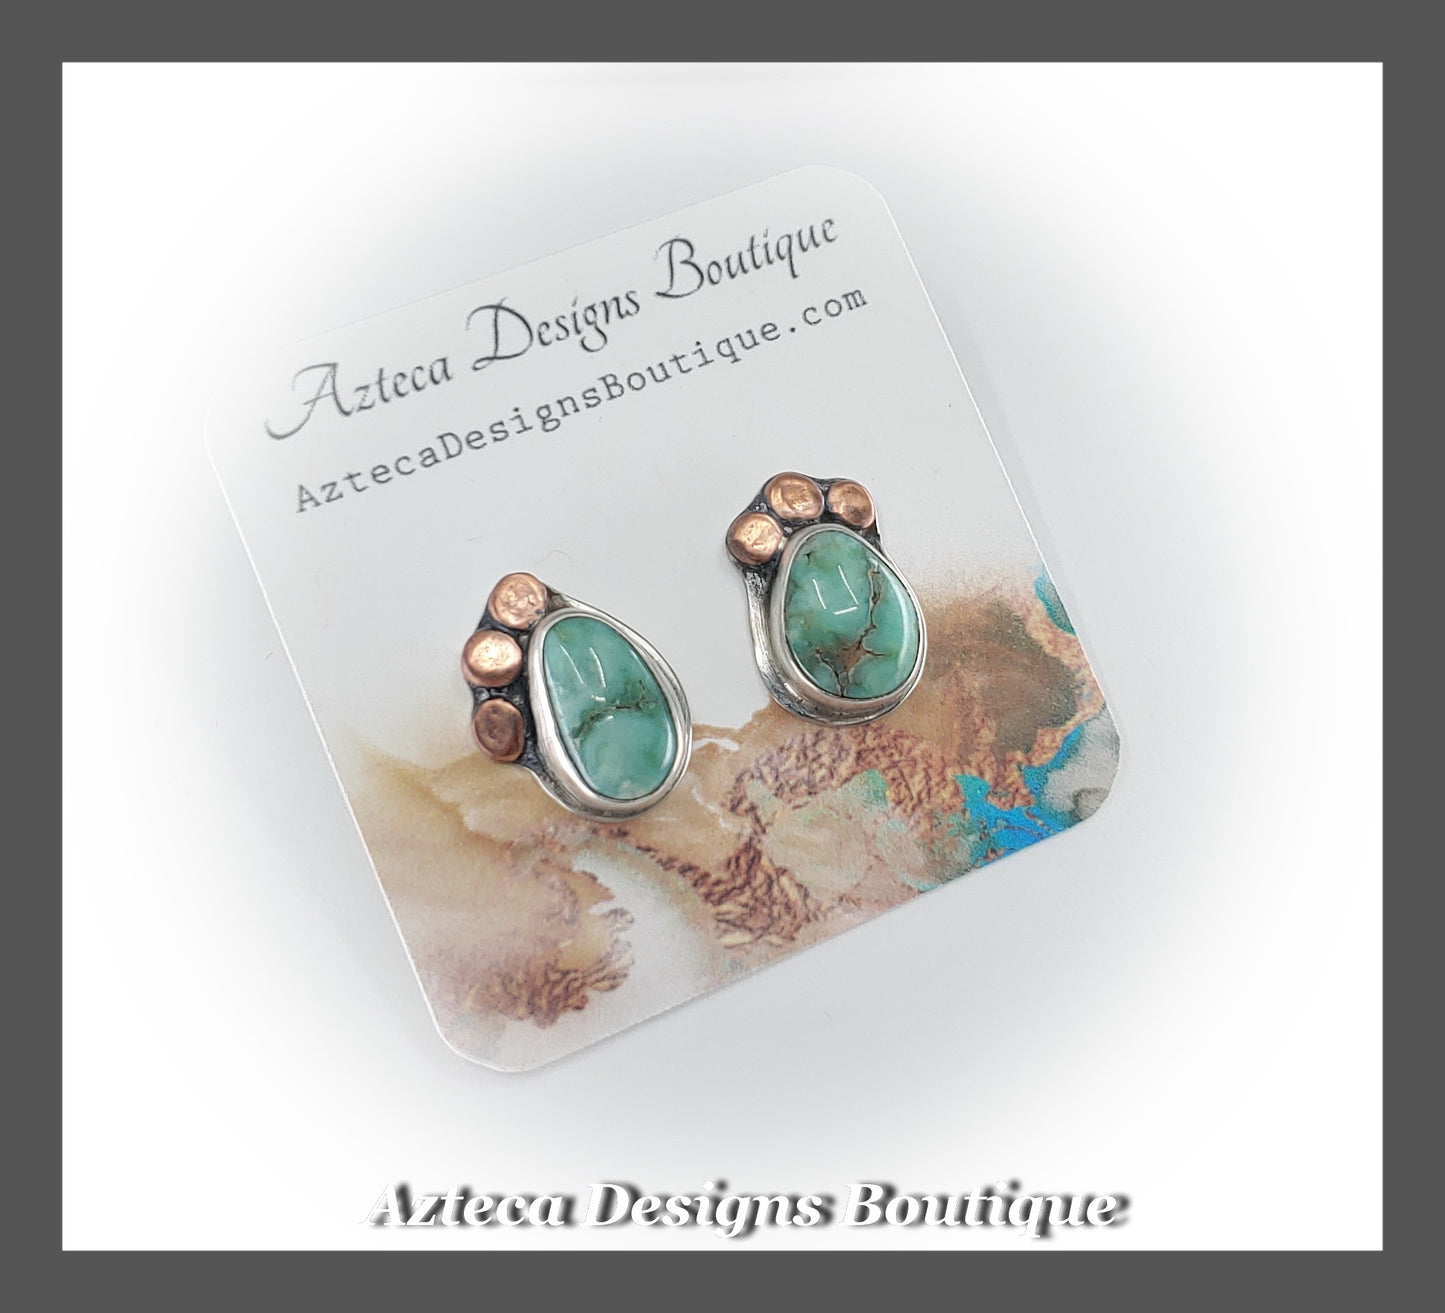 Damale Variscite Hand Fabricated Sterling Silver + Copper Post Earrings Embracing Individuality